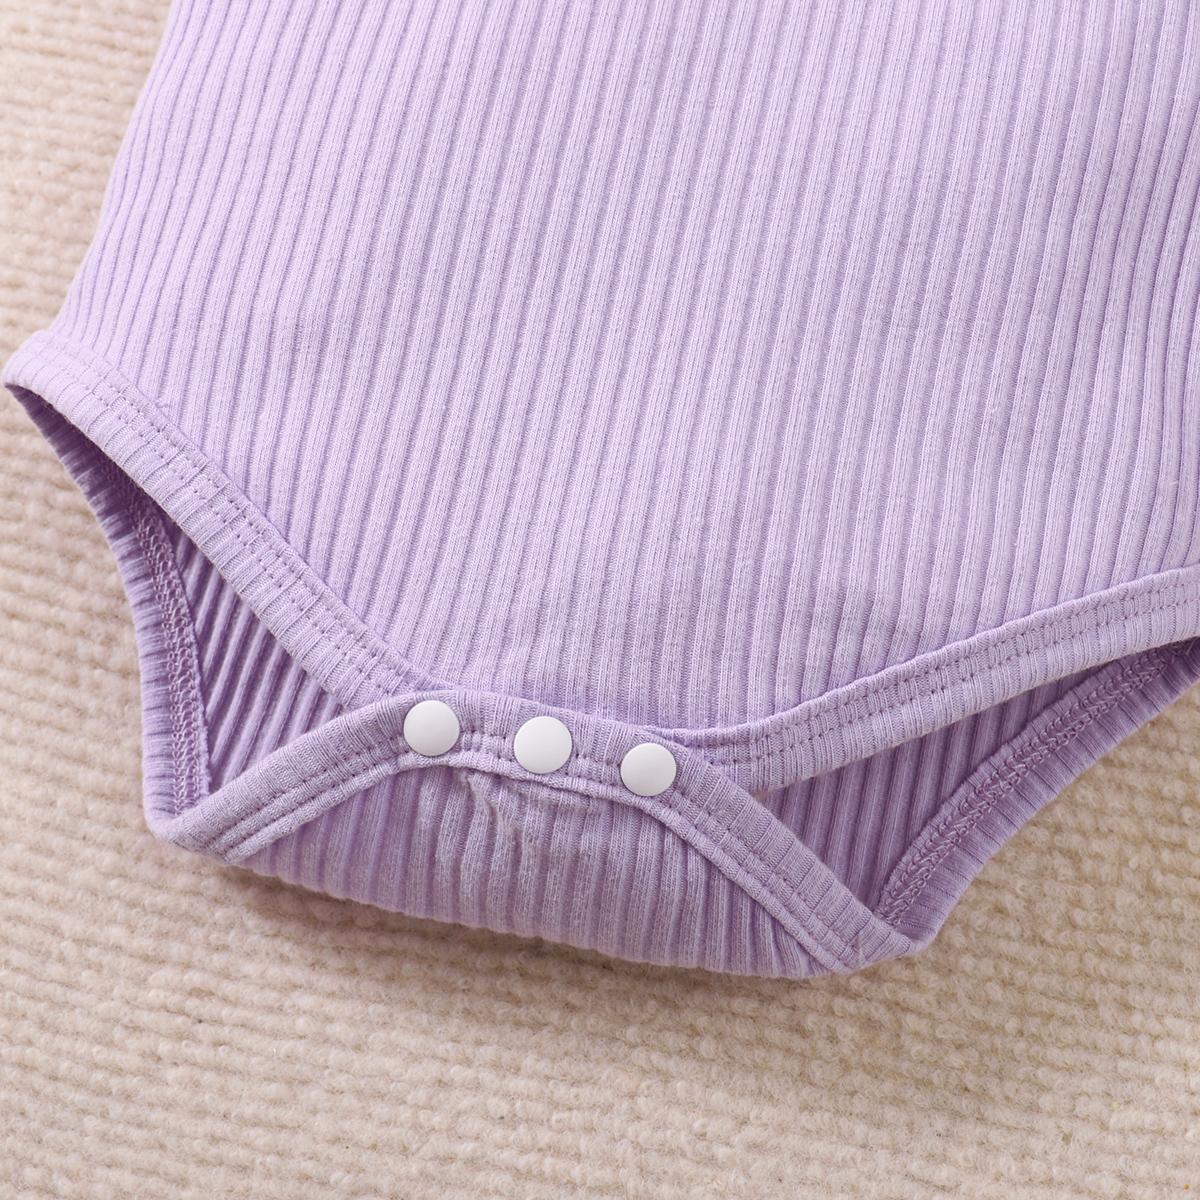 0-18M Baby Girls Clothes Ruffle Short Sleeve Romper Summer Purple Outfits  Baby Clothes Wholesale Catpapa YCS122212451